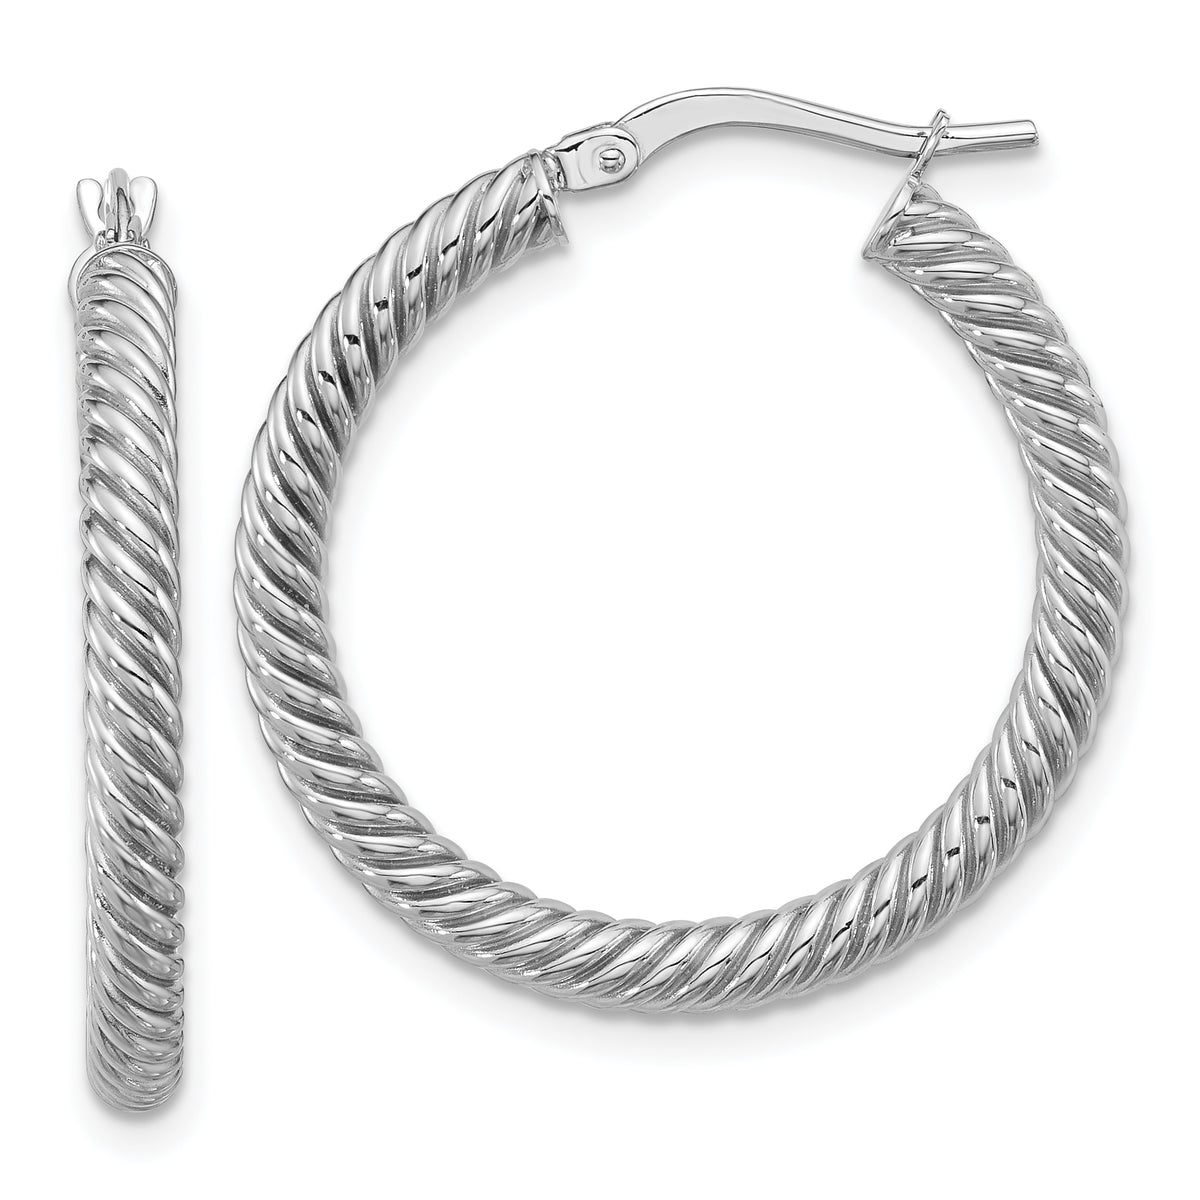 14k 3x20mm White Gold Twisted Round Hoop Earrings